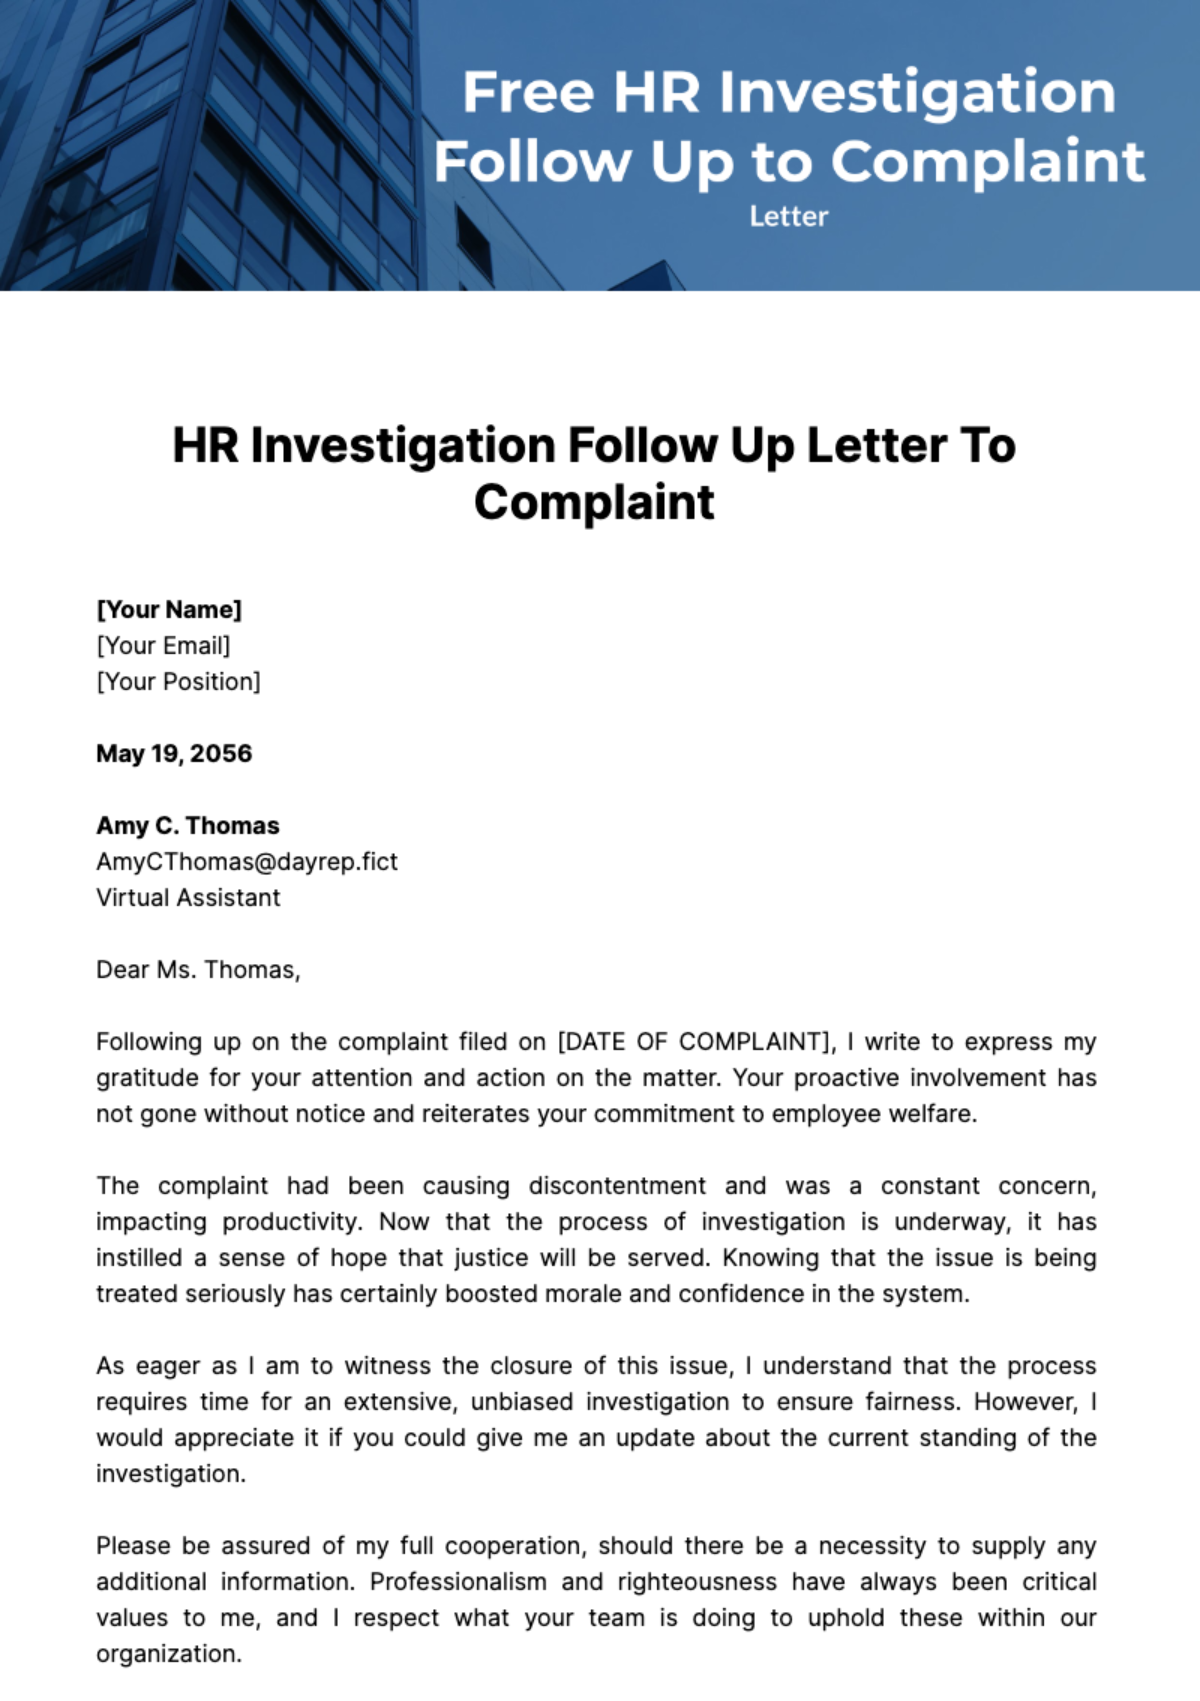 Free HR Investigation Follow Up Letter to Complaint Template